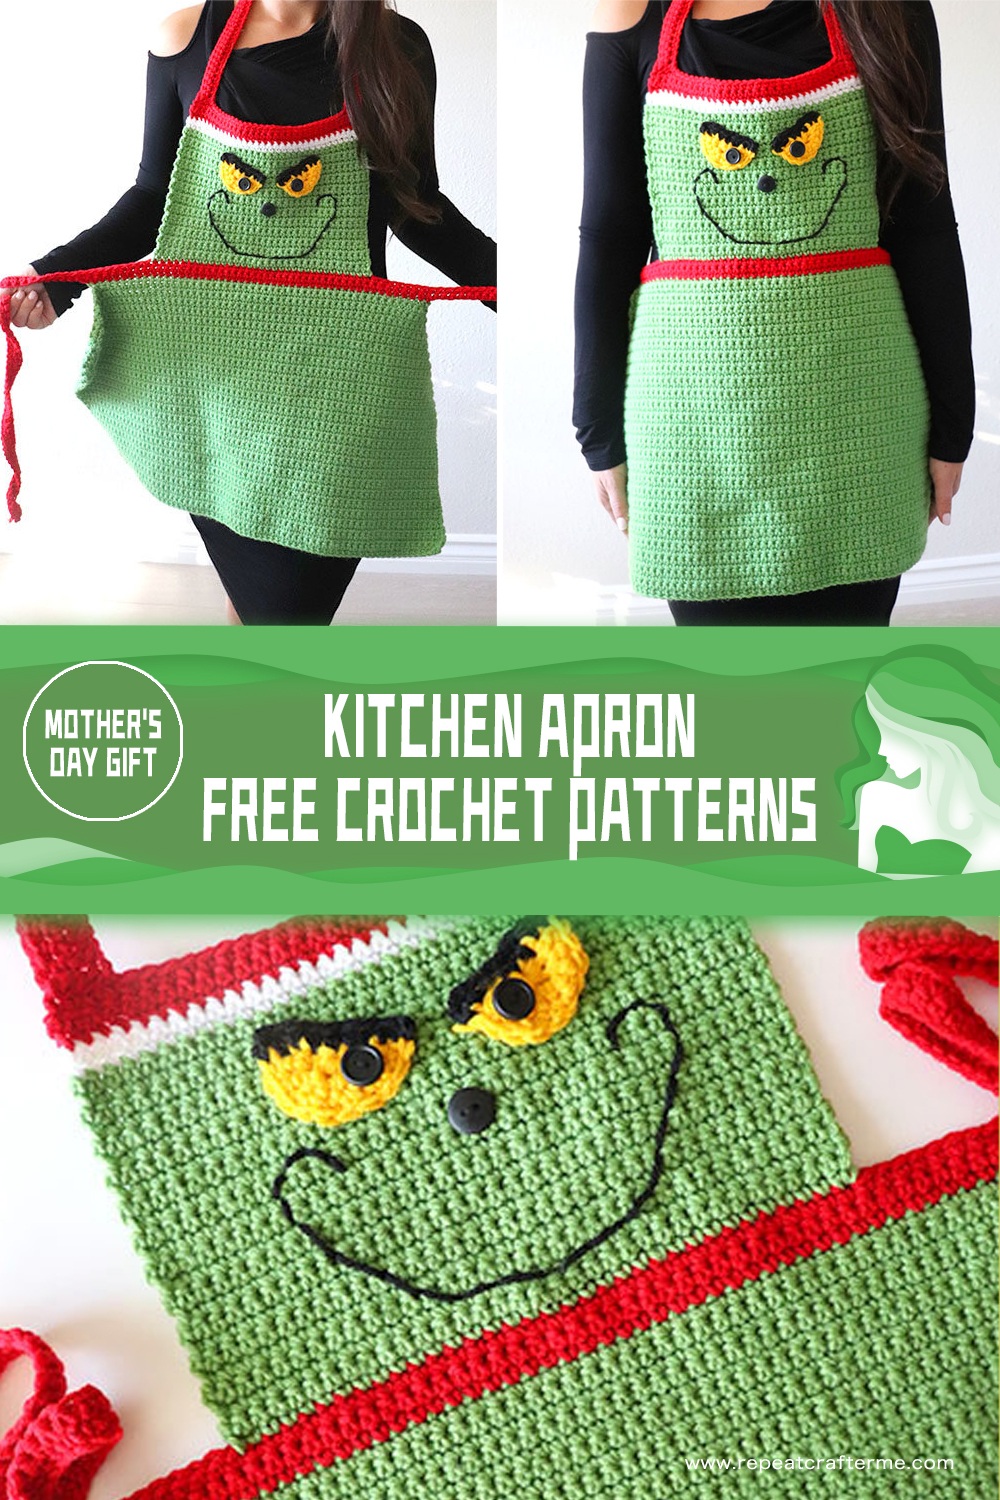 Mother's Day Gift - Kitchen Apron Crochet Patterns free